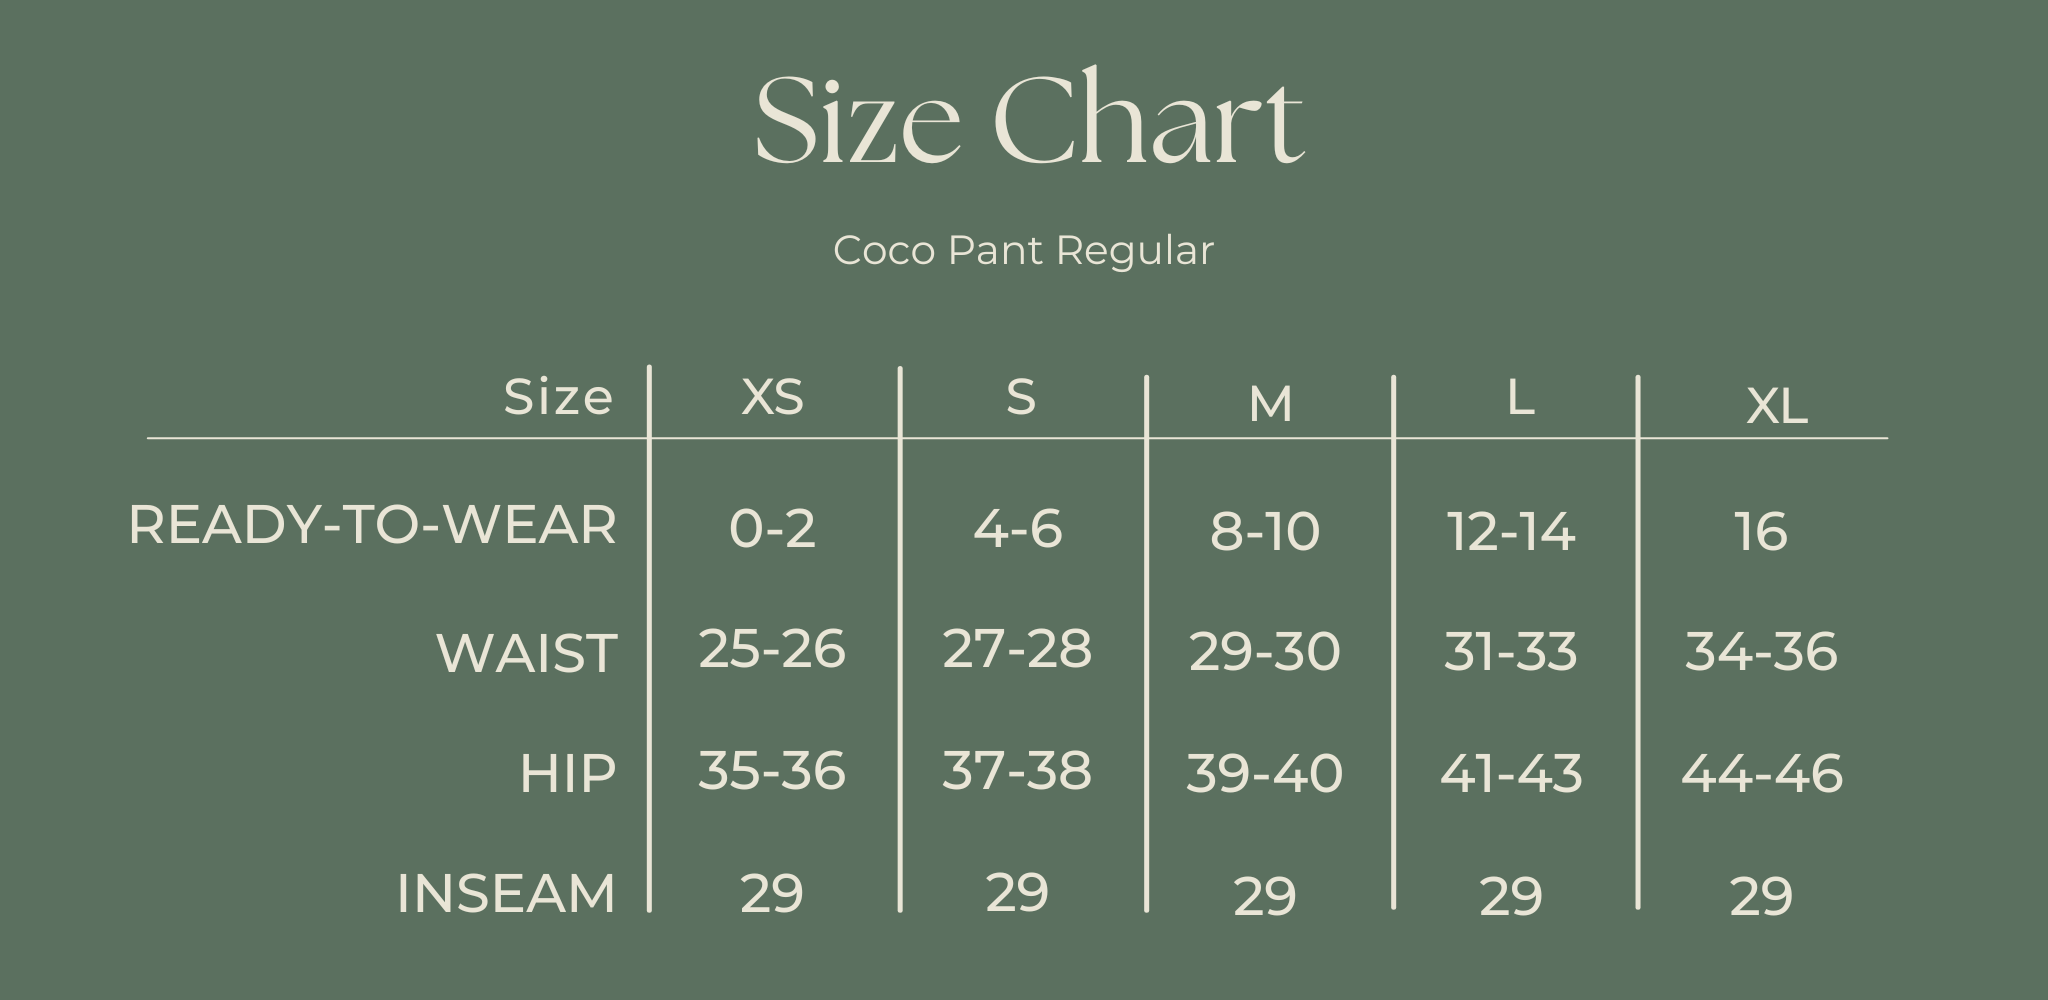 Coco Pant Regular Size Chart 11/8/2022